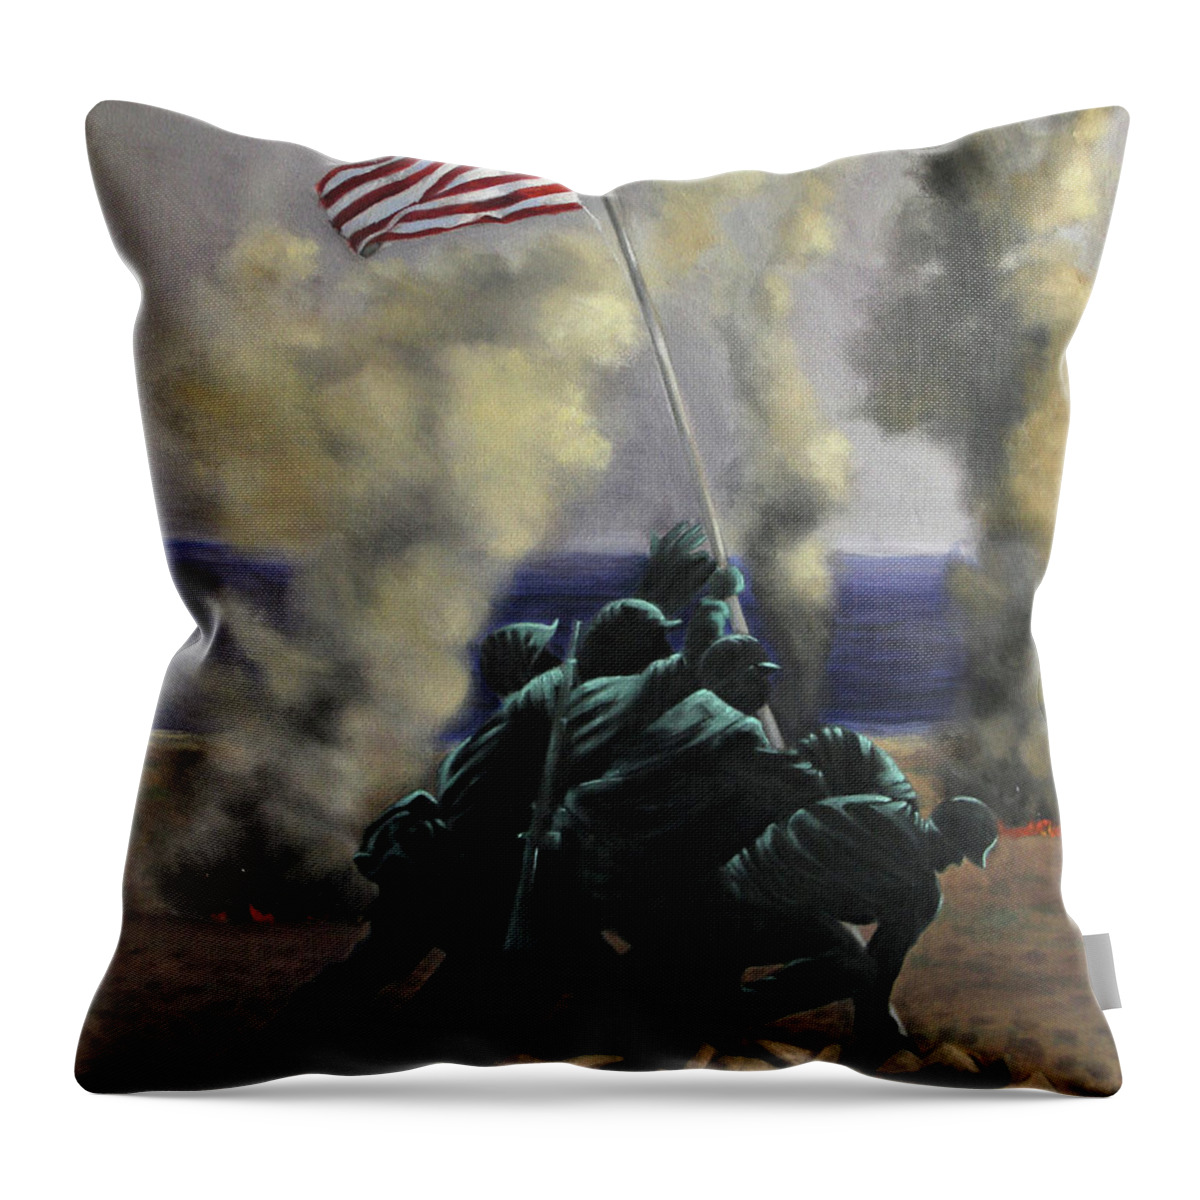 War Throw Pillow featuring the painting The Cost Of Freedom by Anthony Falbo